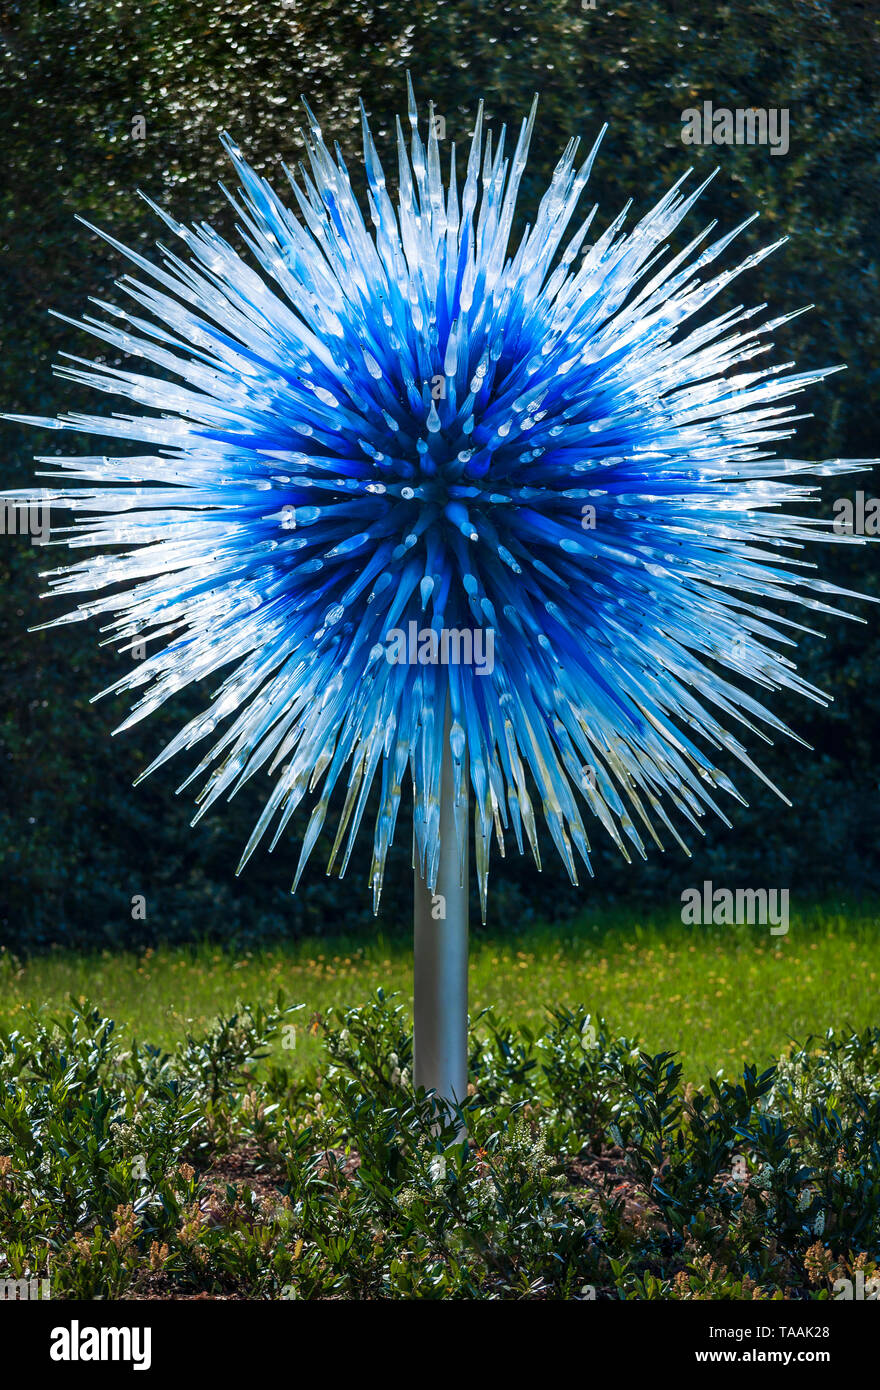 Dale Chihuly glass sculpture called 'Sapphire Star' at Kew Gardens. Stock Photo